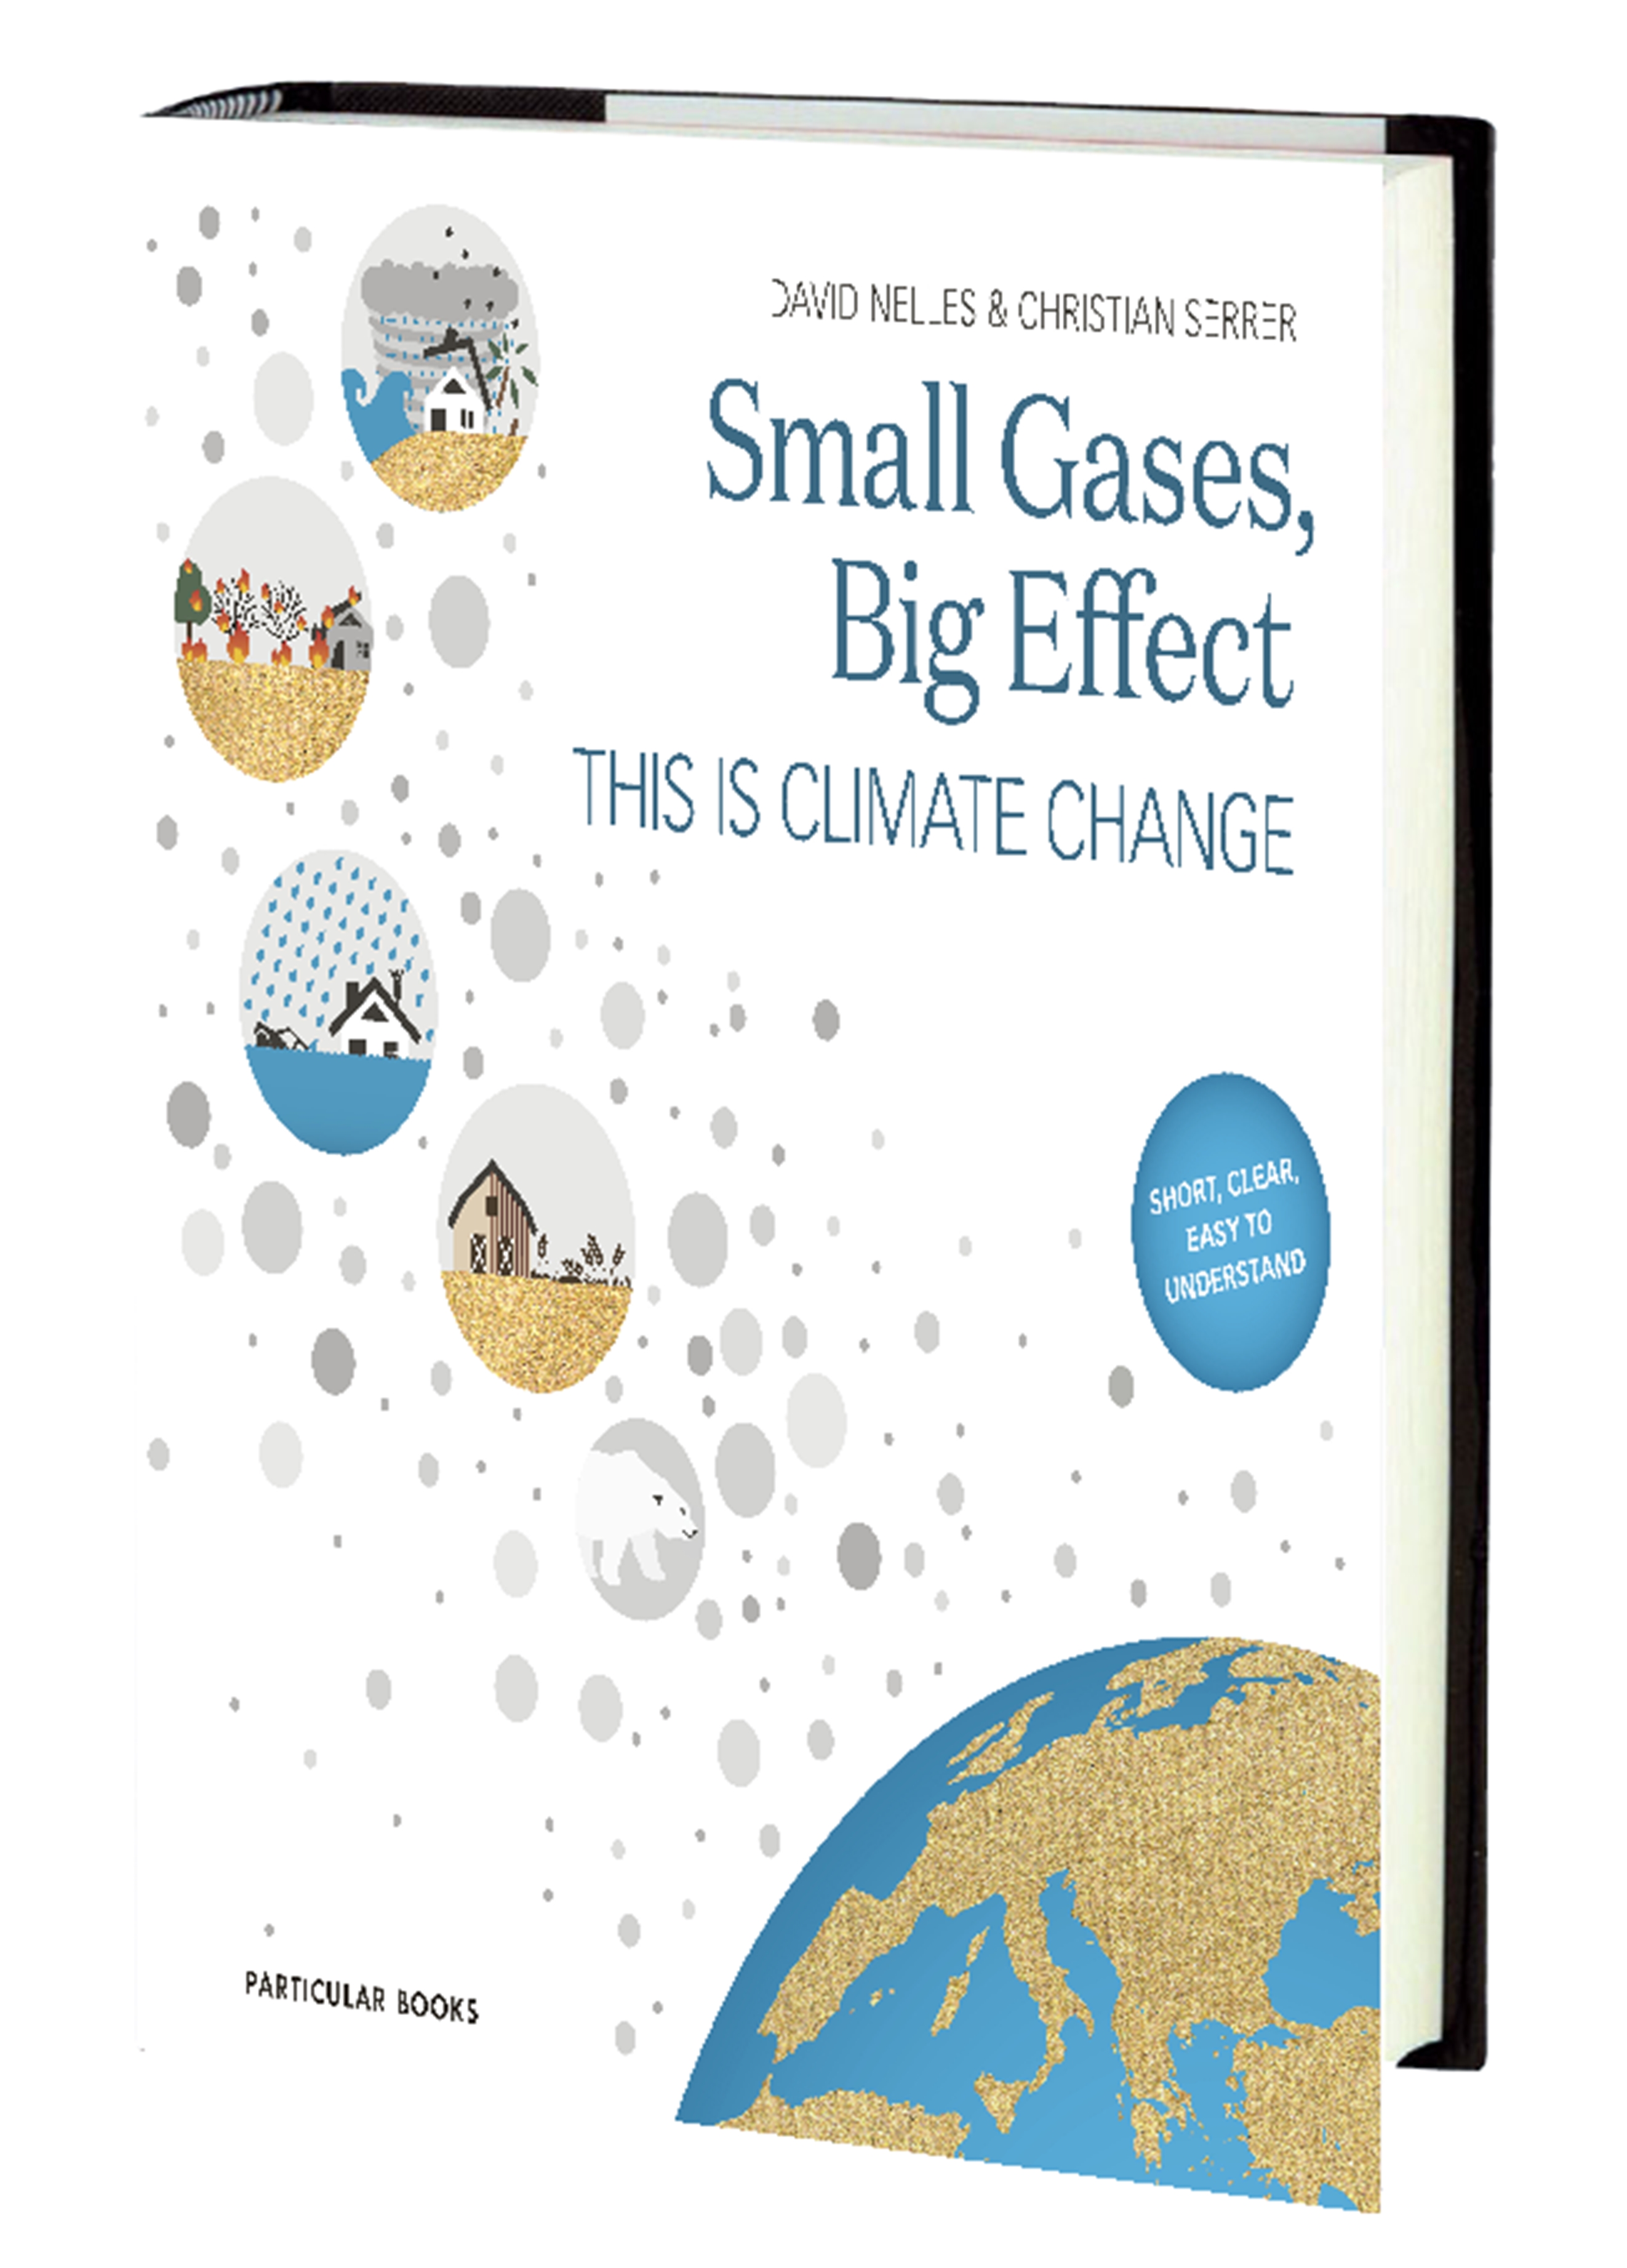 Small Gases, Big Effect: This book is a bestseller on climate change